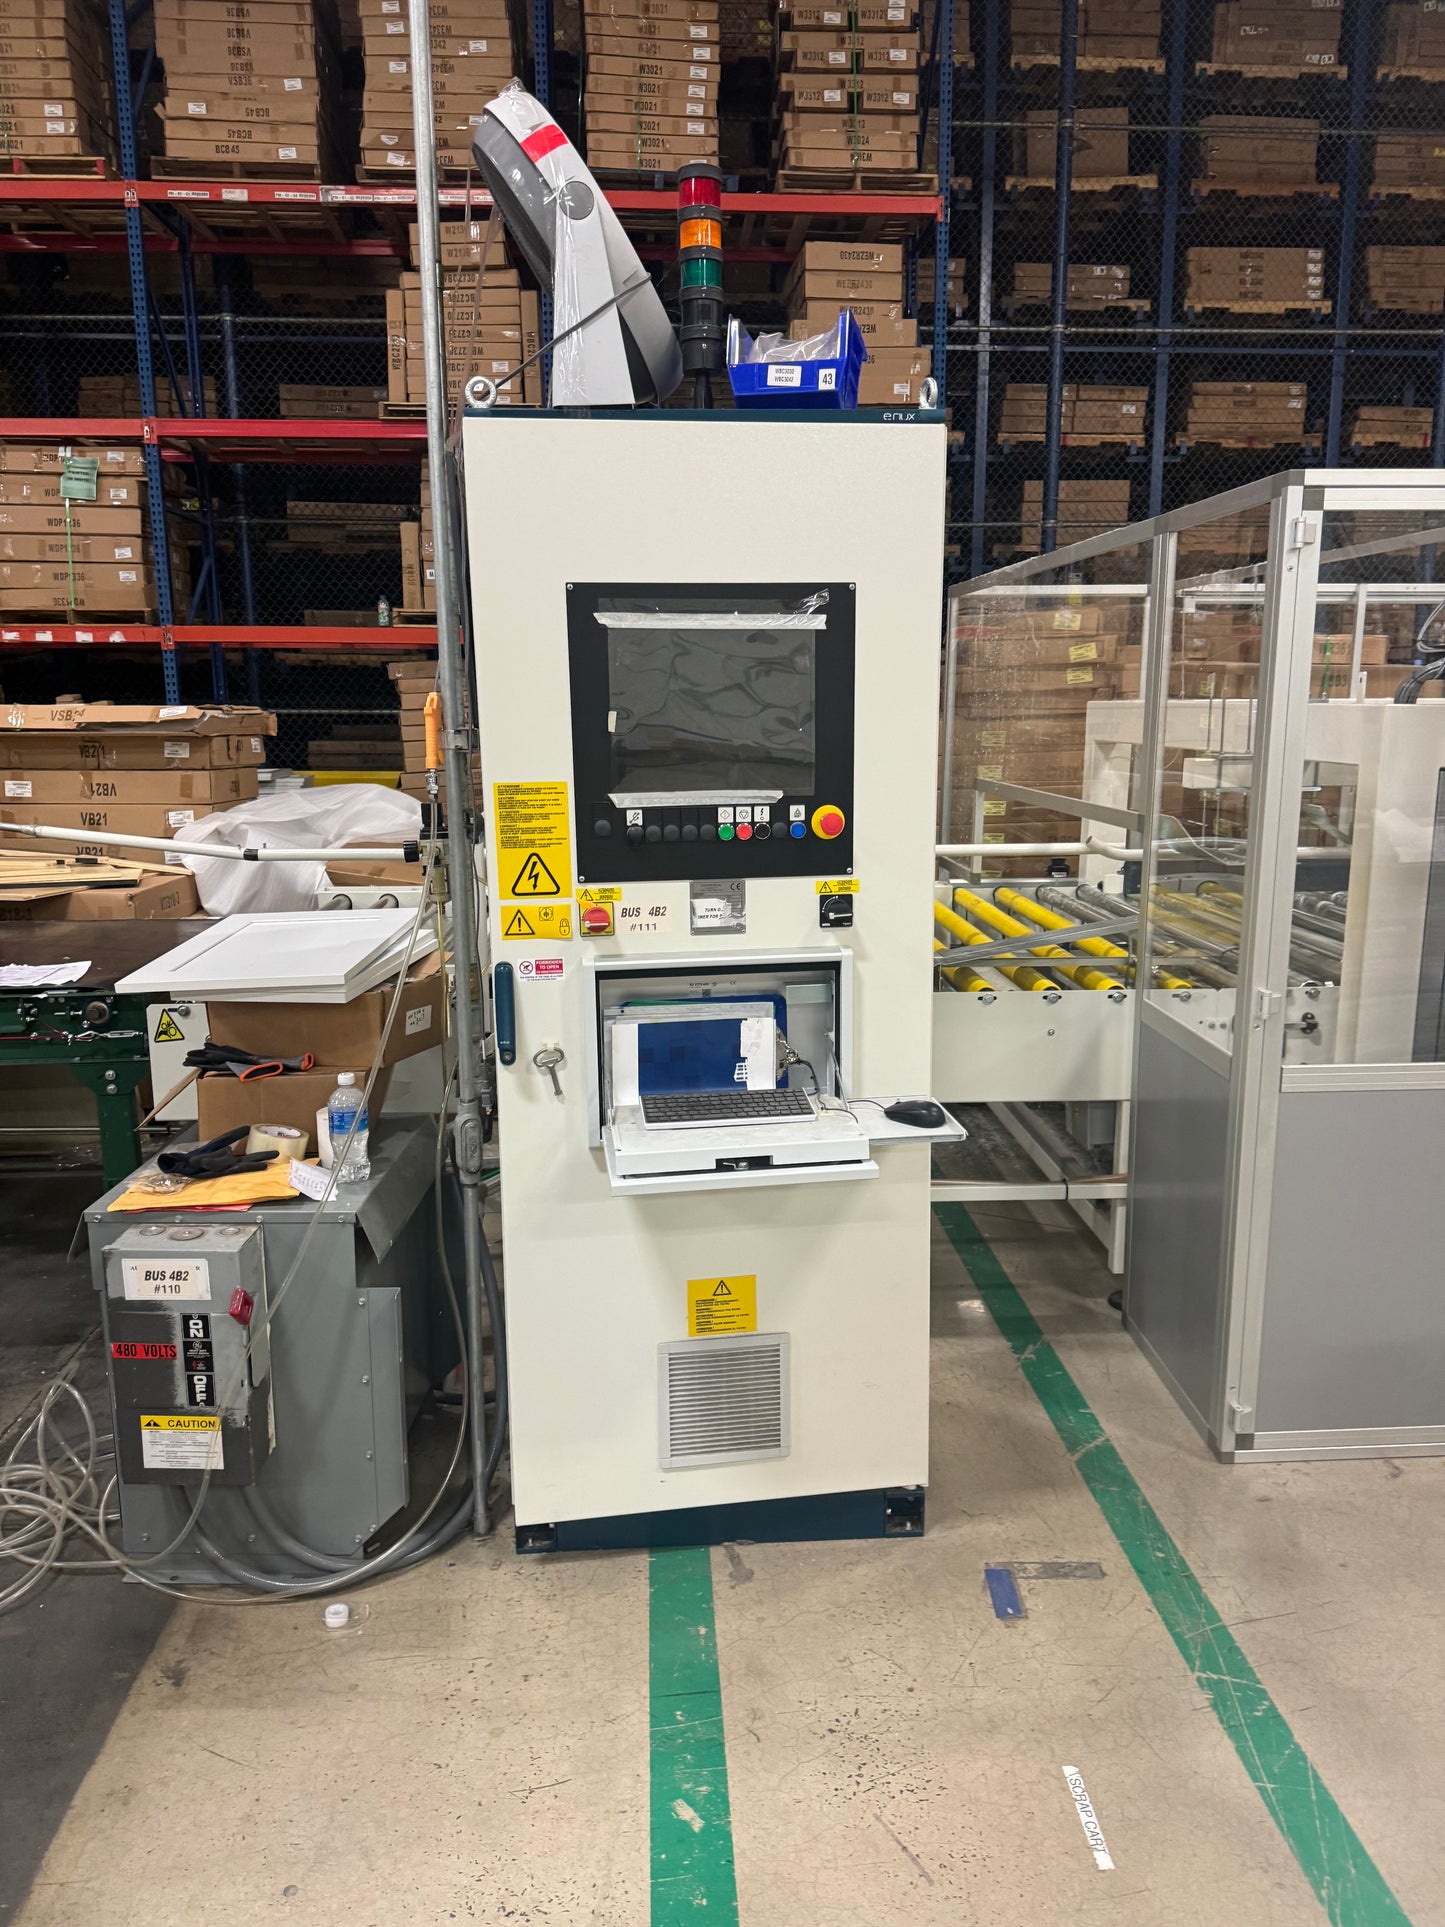 2020 CPC Pack C100 - Hot Glue Cardboard Packing/Closing System with Conveyors - South Carolina